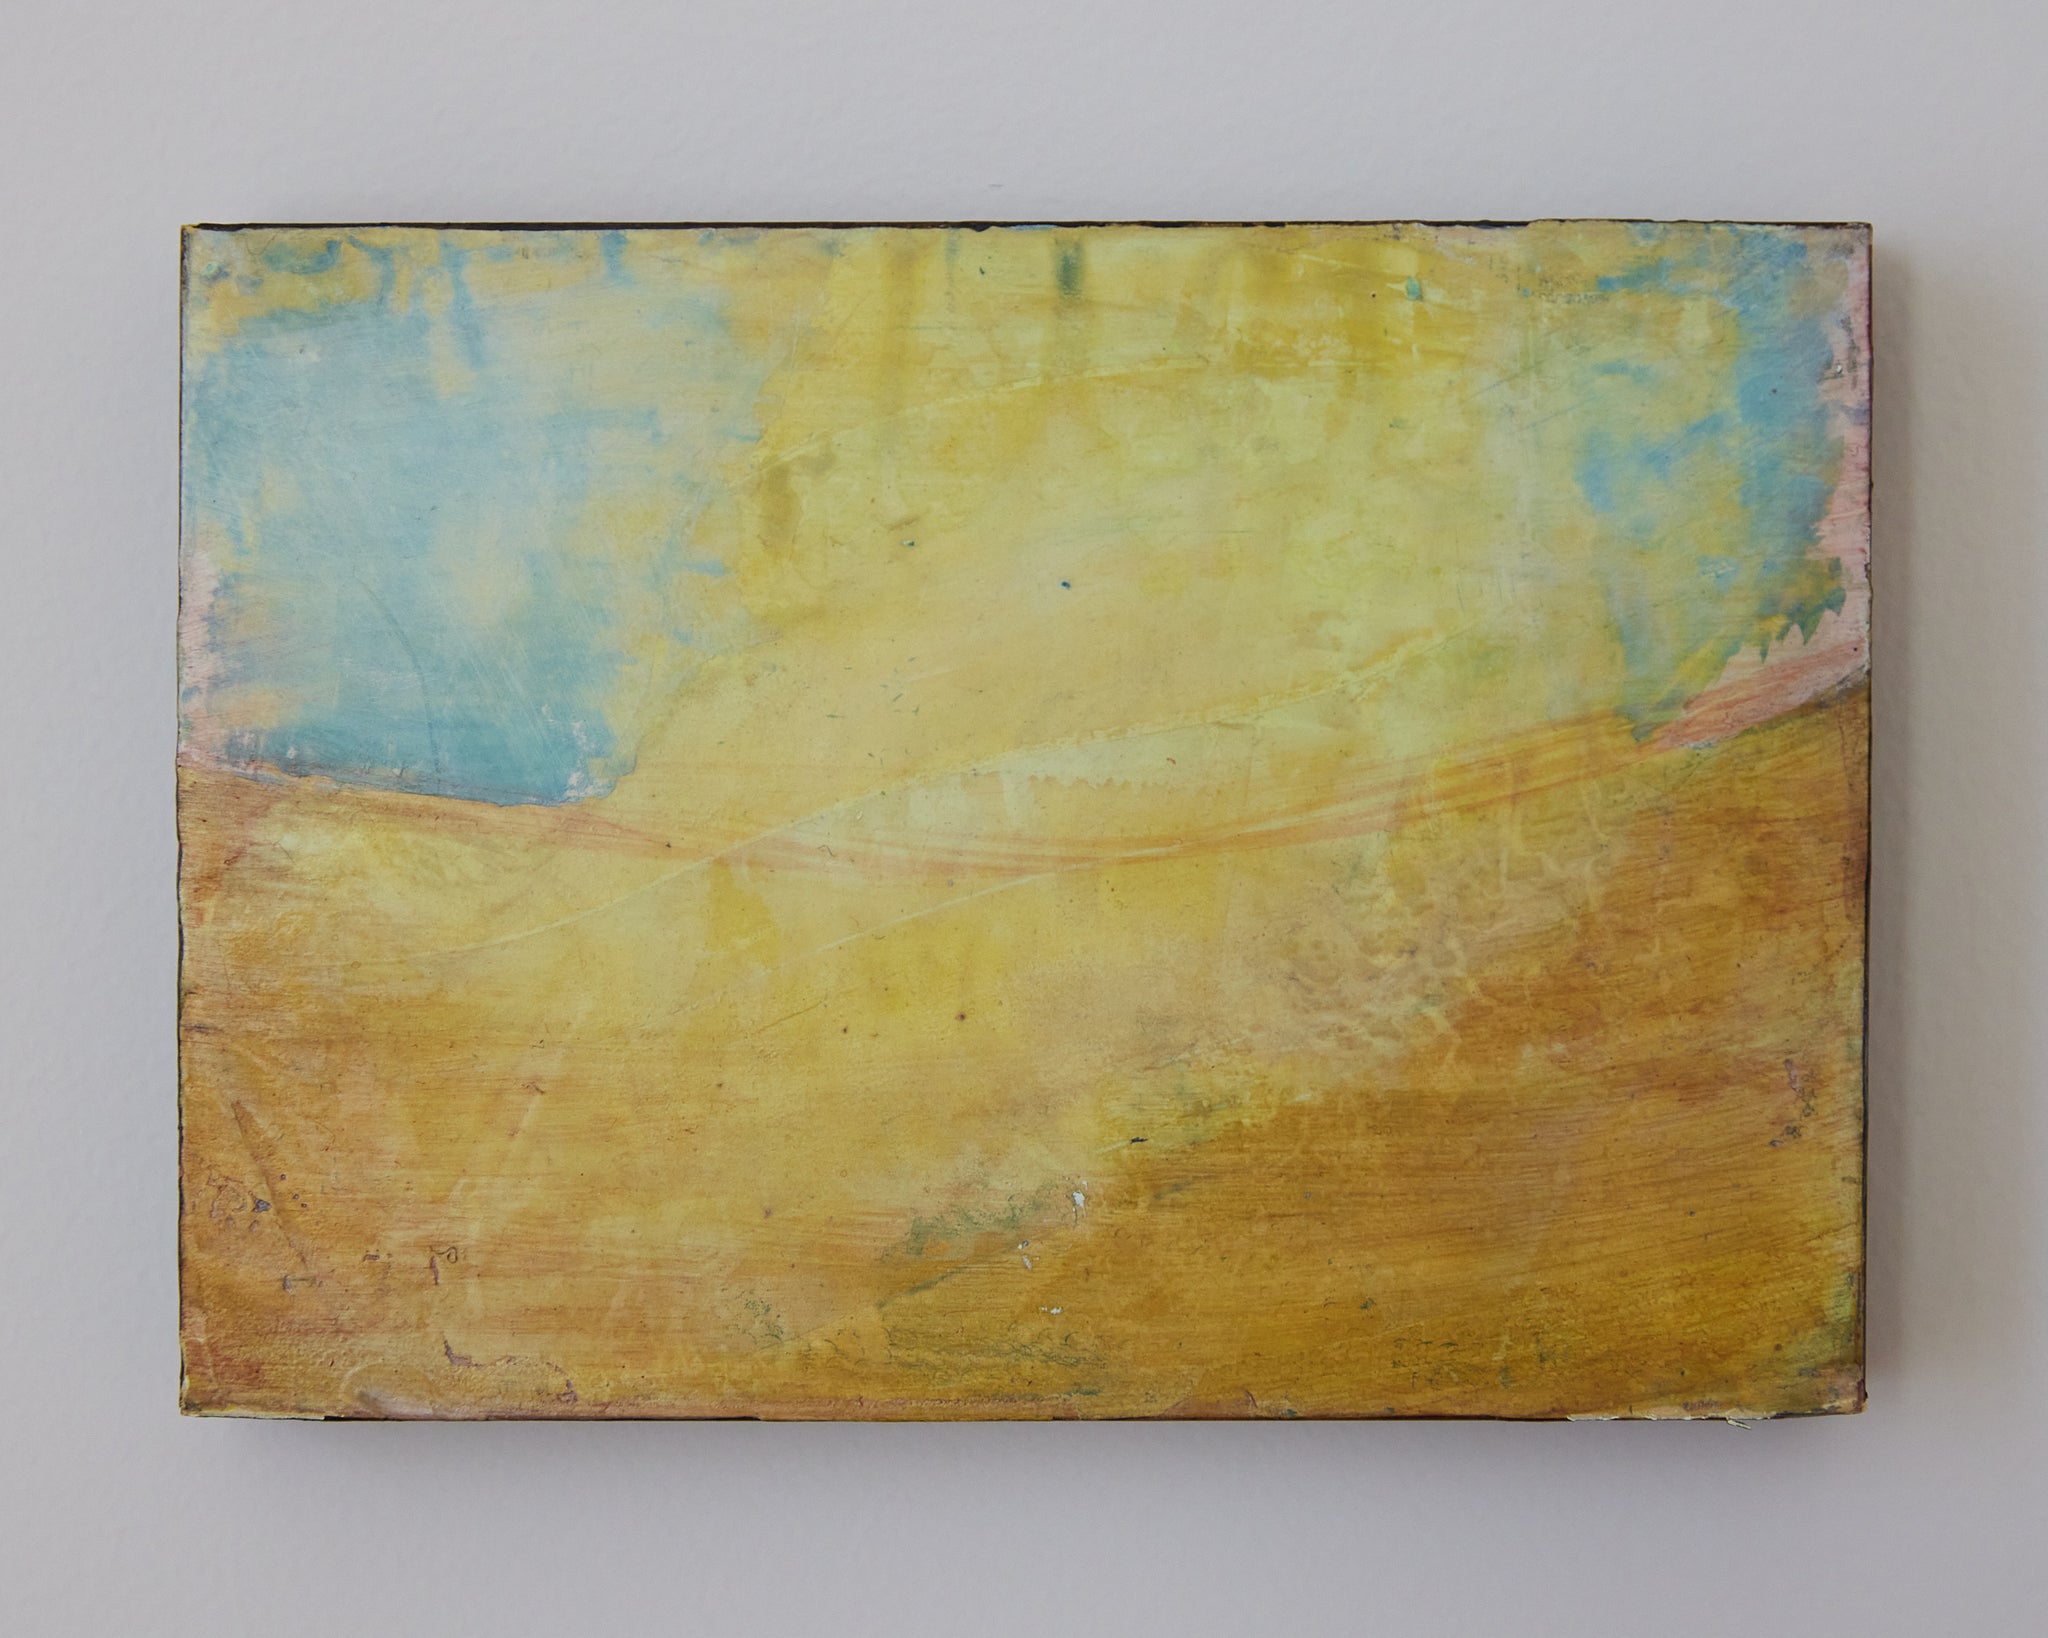 Jo Andres, "Yellow Landscape" SOLD